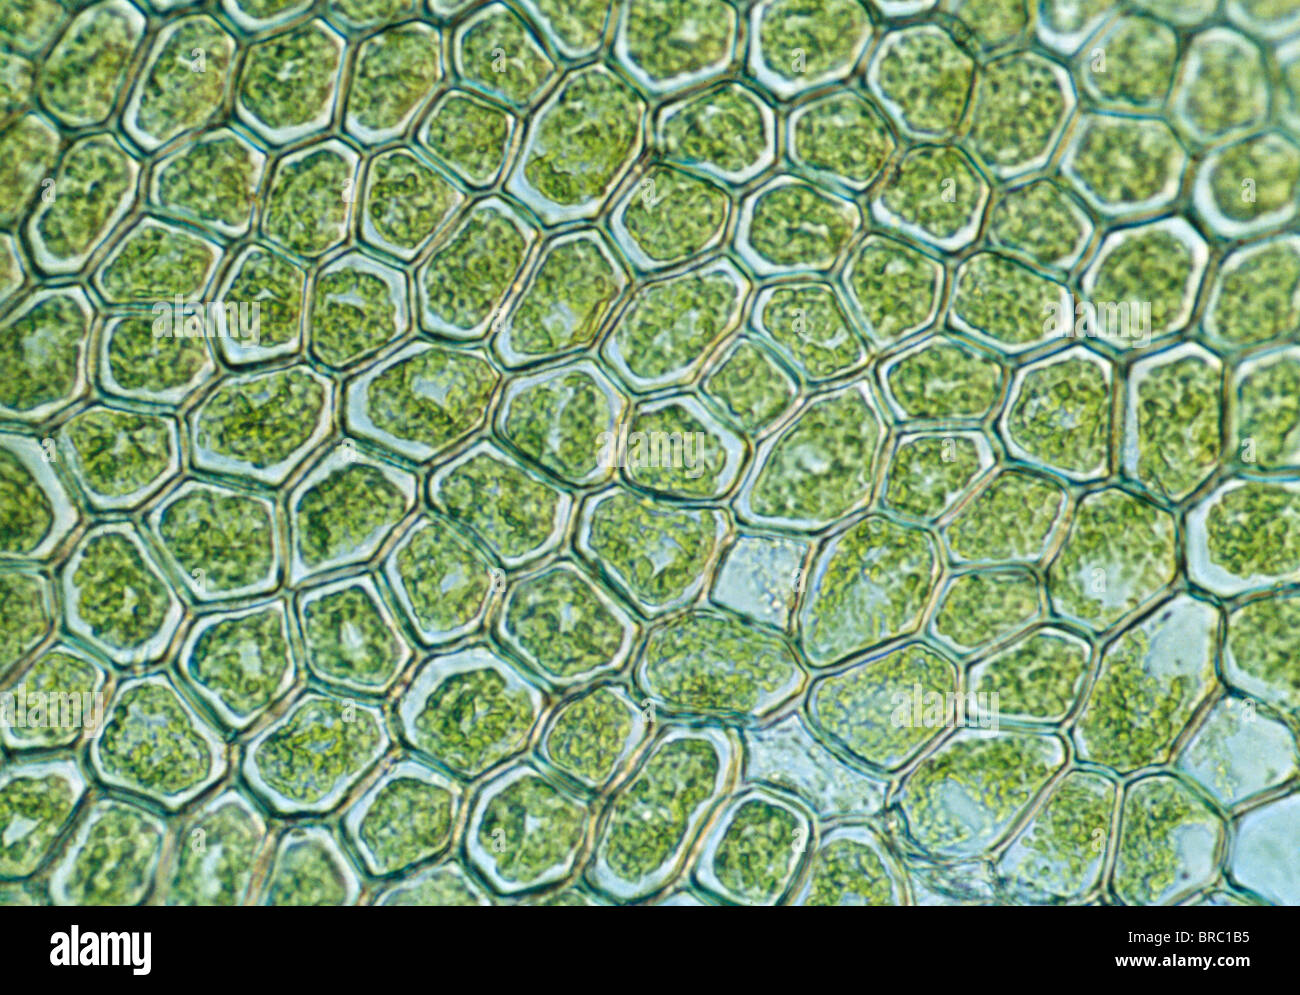 Light Micrograph (LM) of non-vascular plant liverwort showing chloroplasts and oil bodies, magnification x1200 Stock Photo